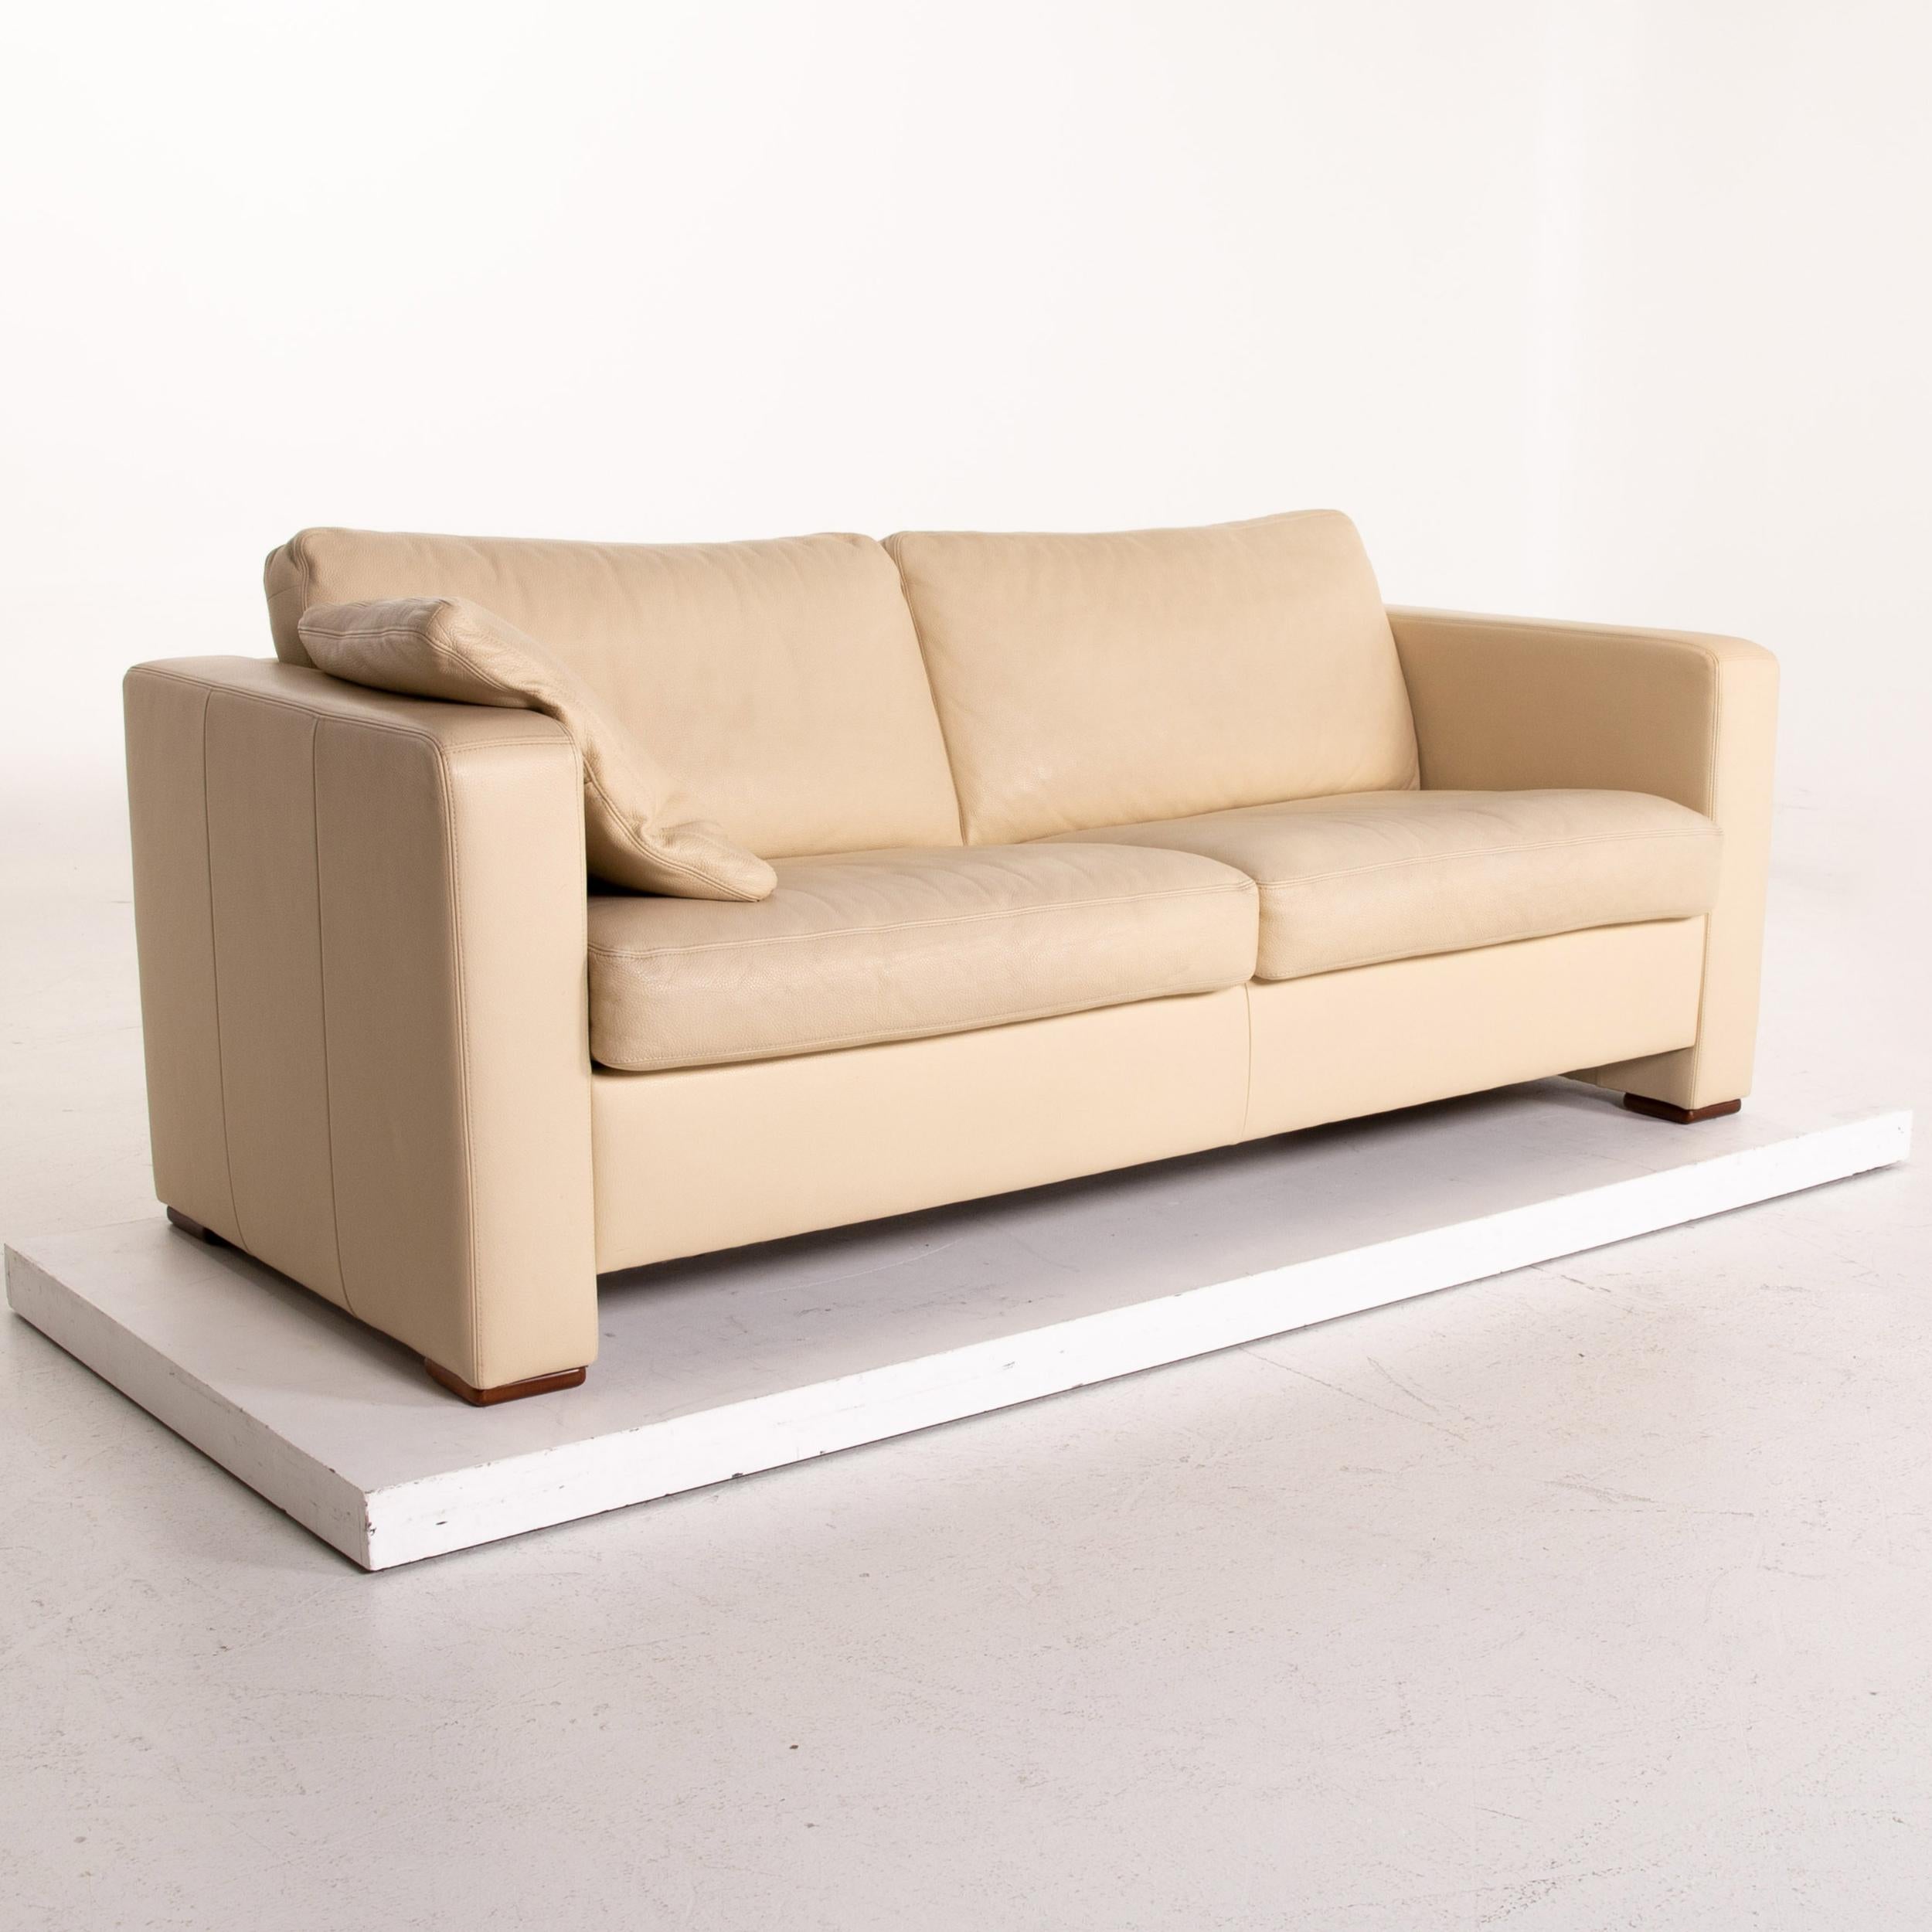 Machalke Leather Sofa Beige Three-Seat Couch In Good Condition For Sale In Cologne, DE